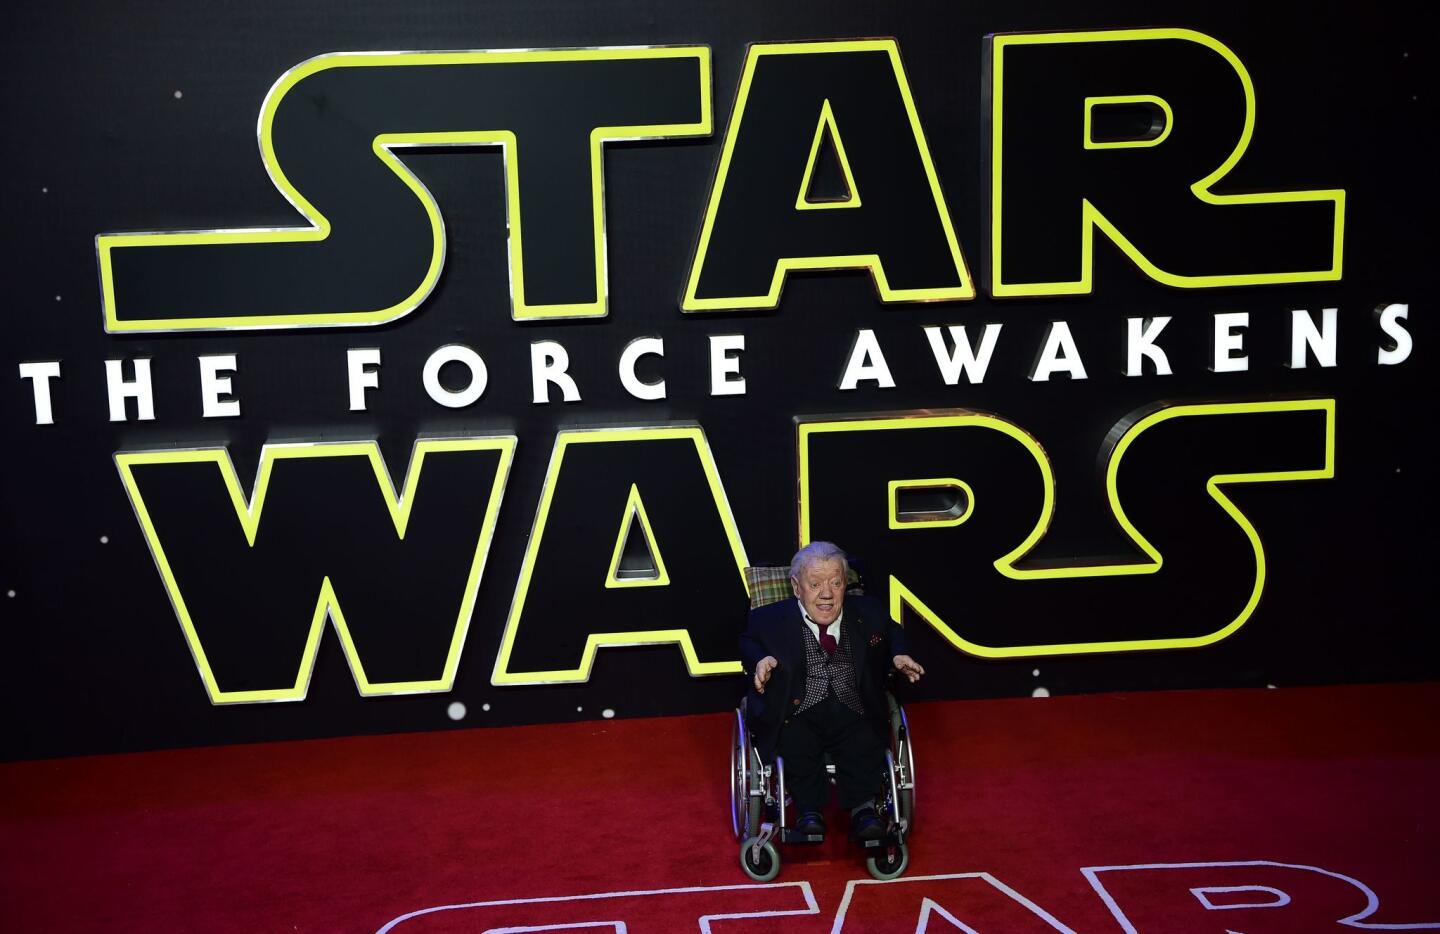 Kenny Baker at the 'Star Wars: The Force Awakens' premiere in London